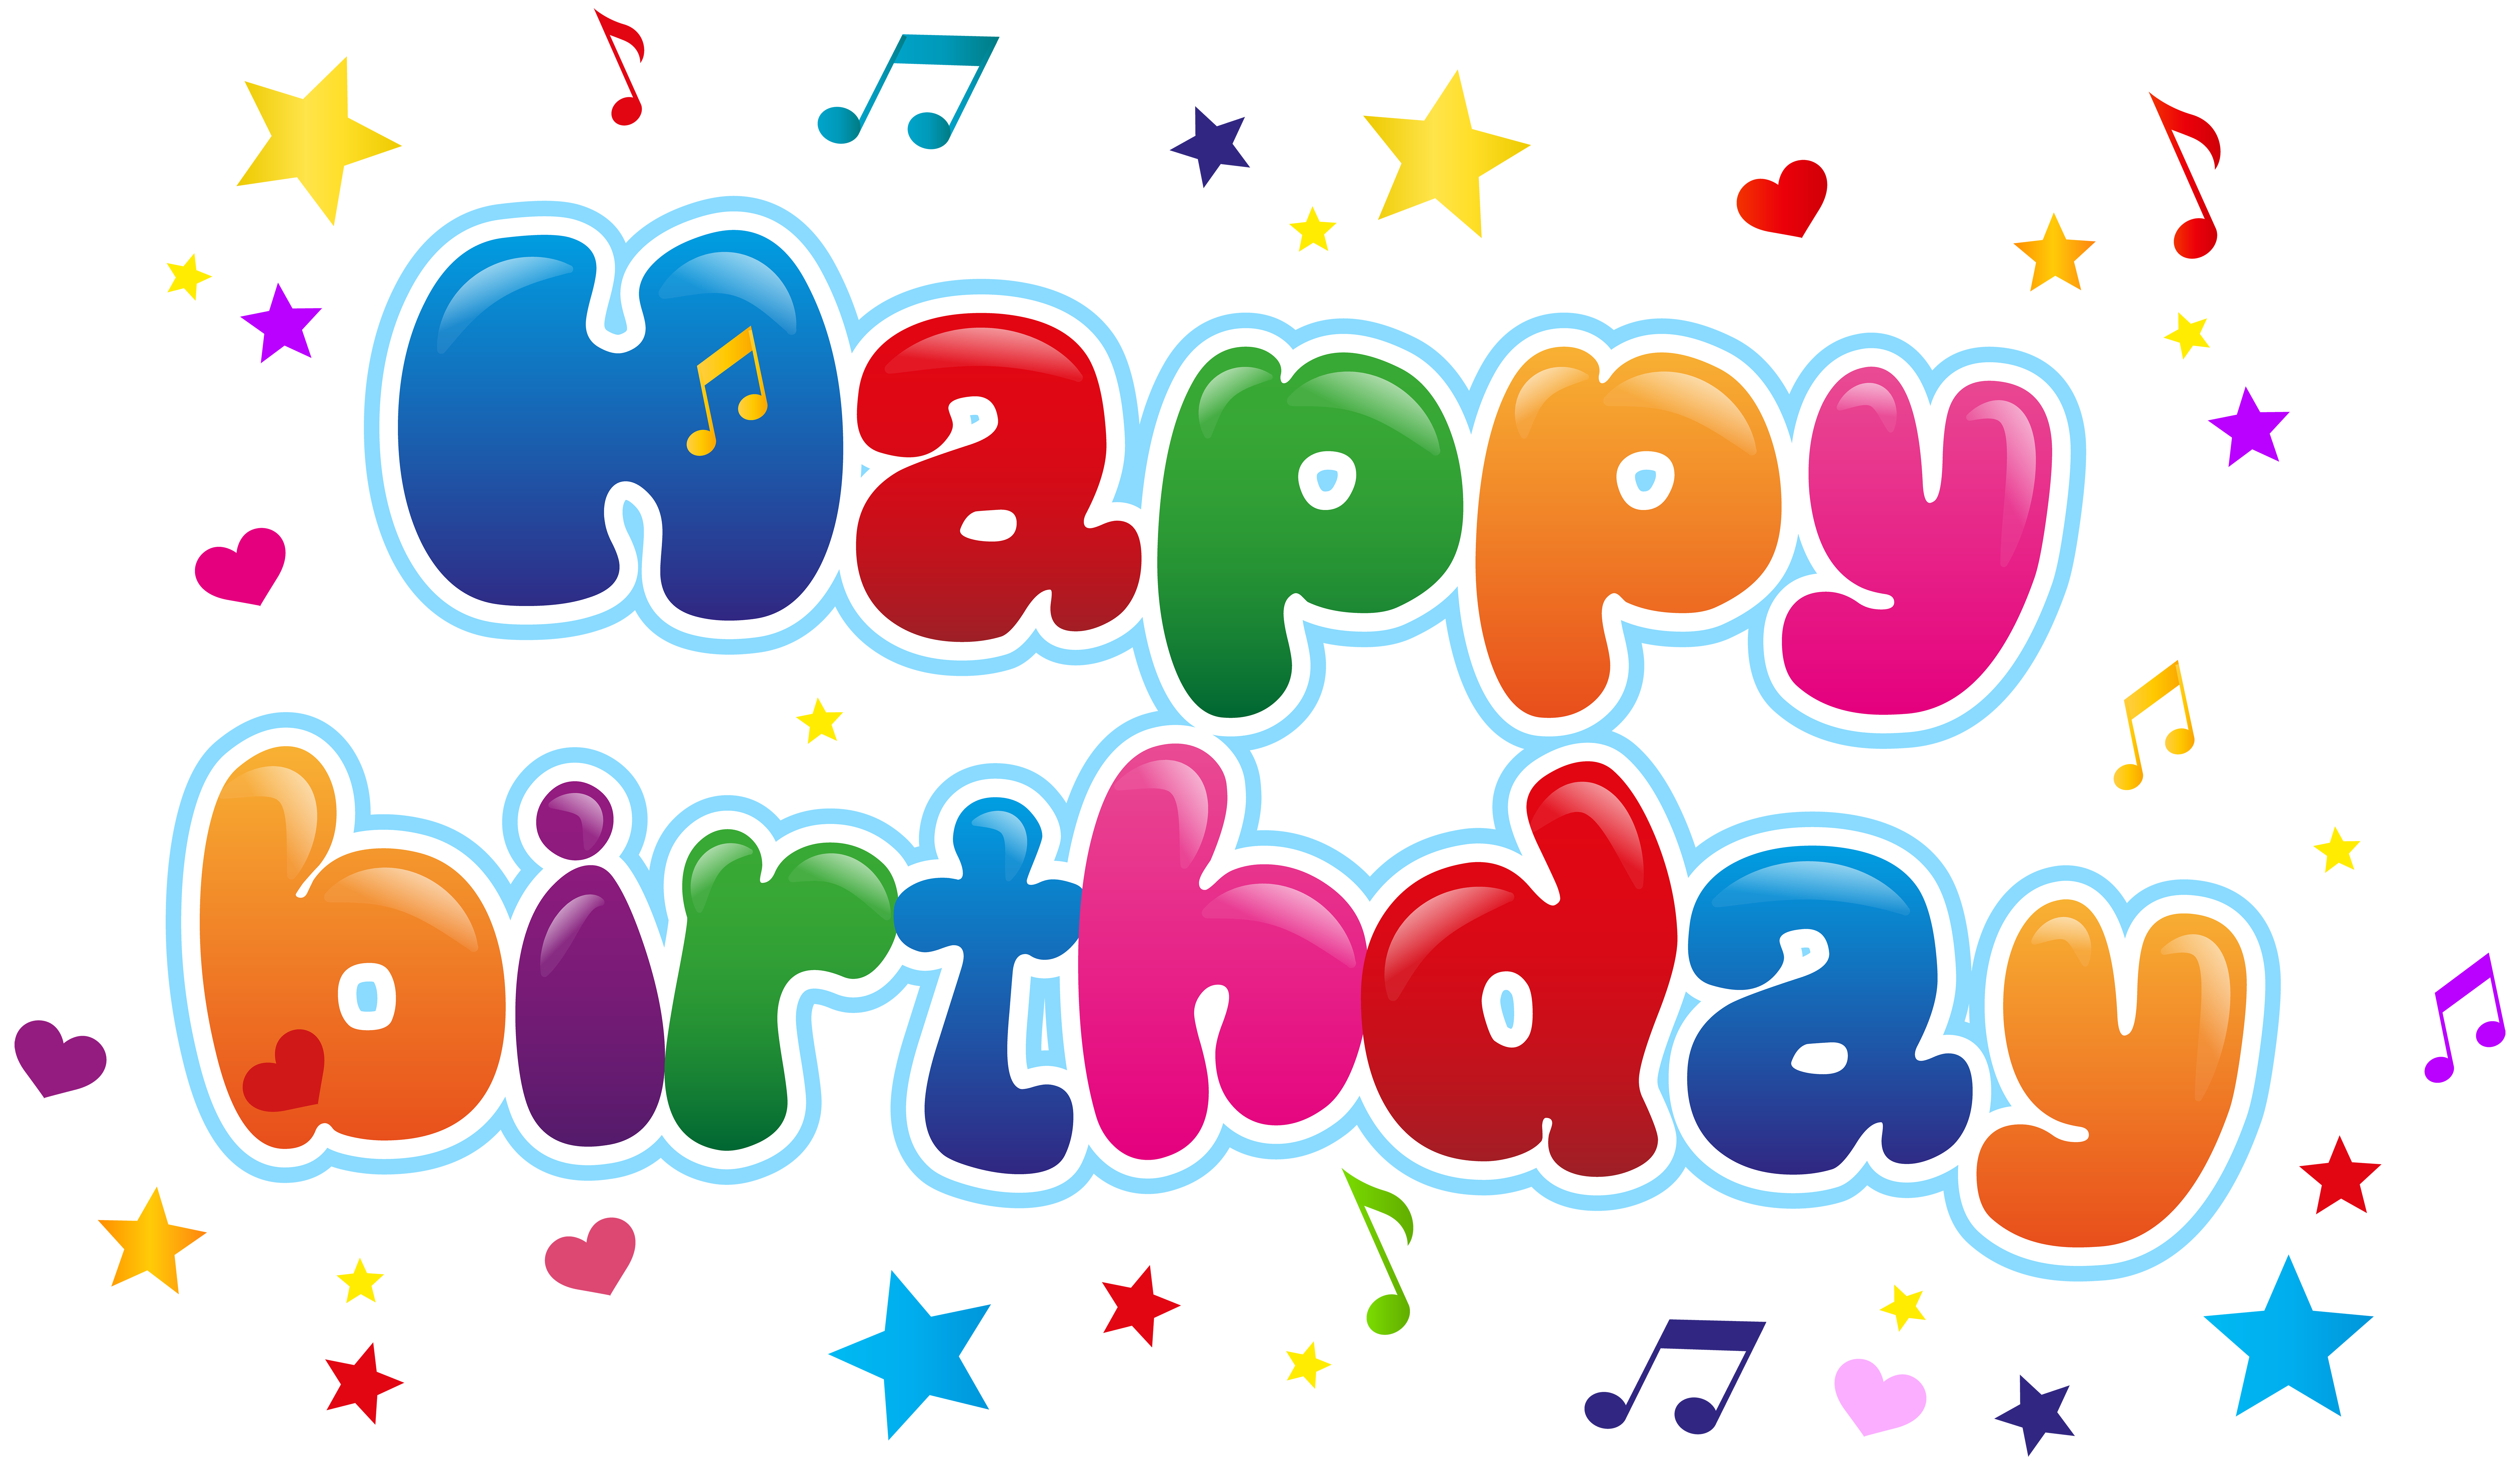 Motivation clipart phrase. Cute happy birthday png